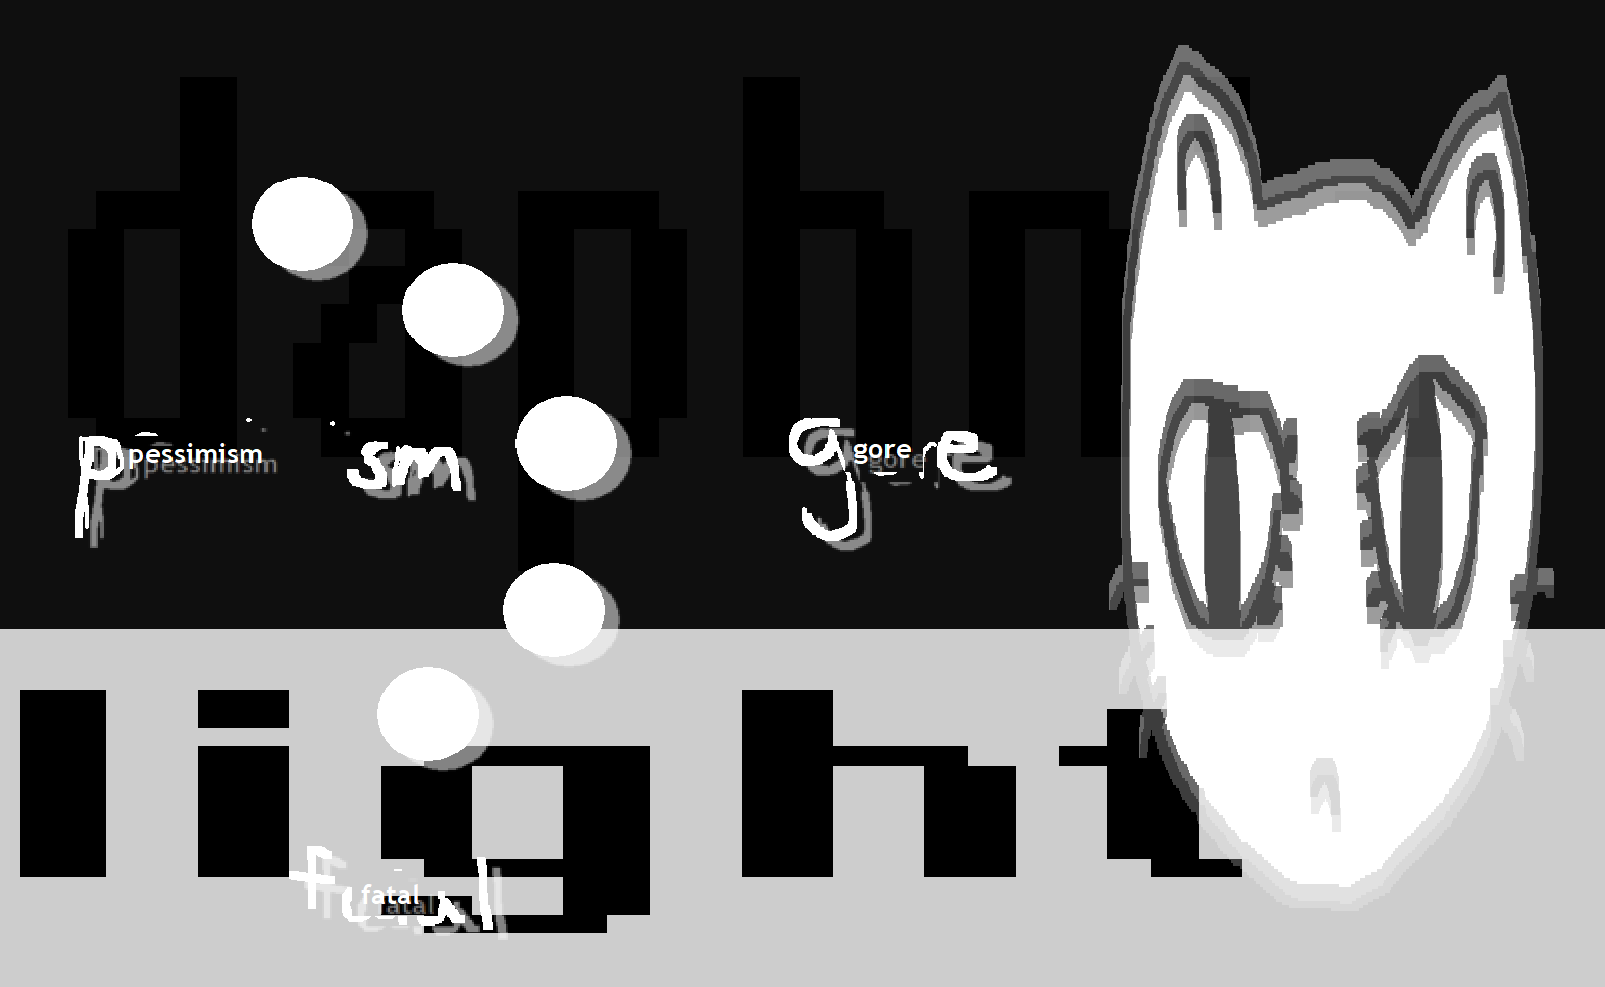 title says "light" in pixelated text over 5 circles floating in space and a cat's head on the right